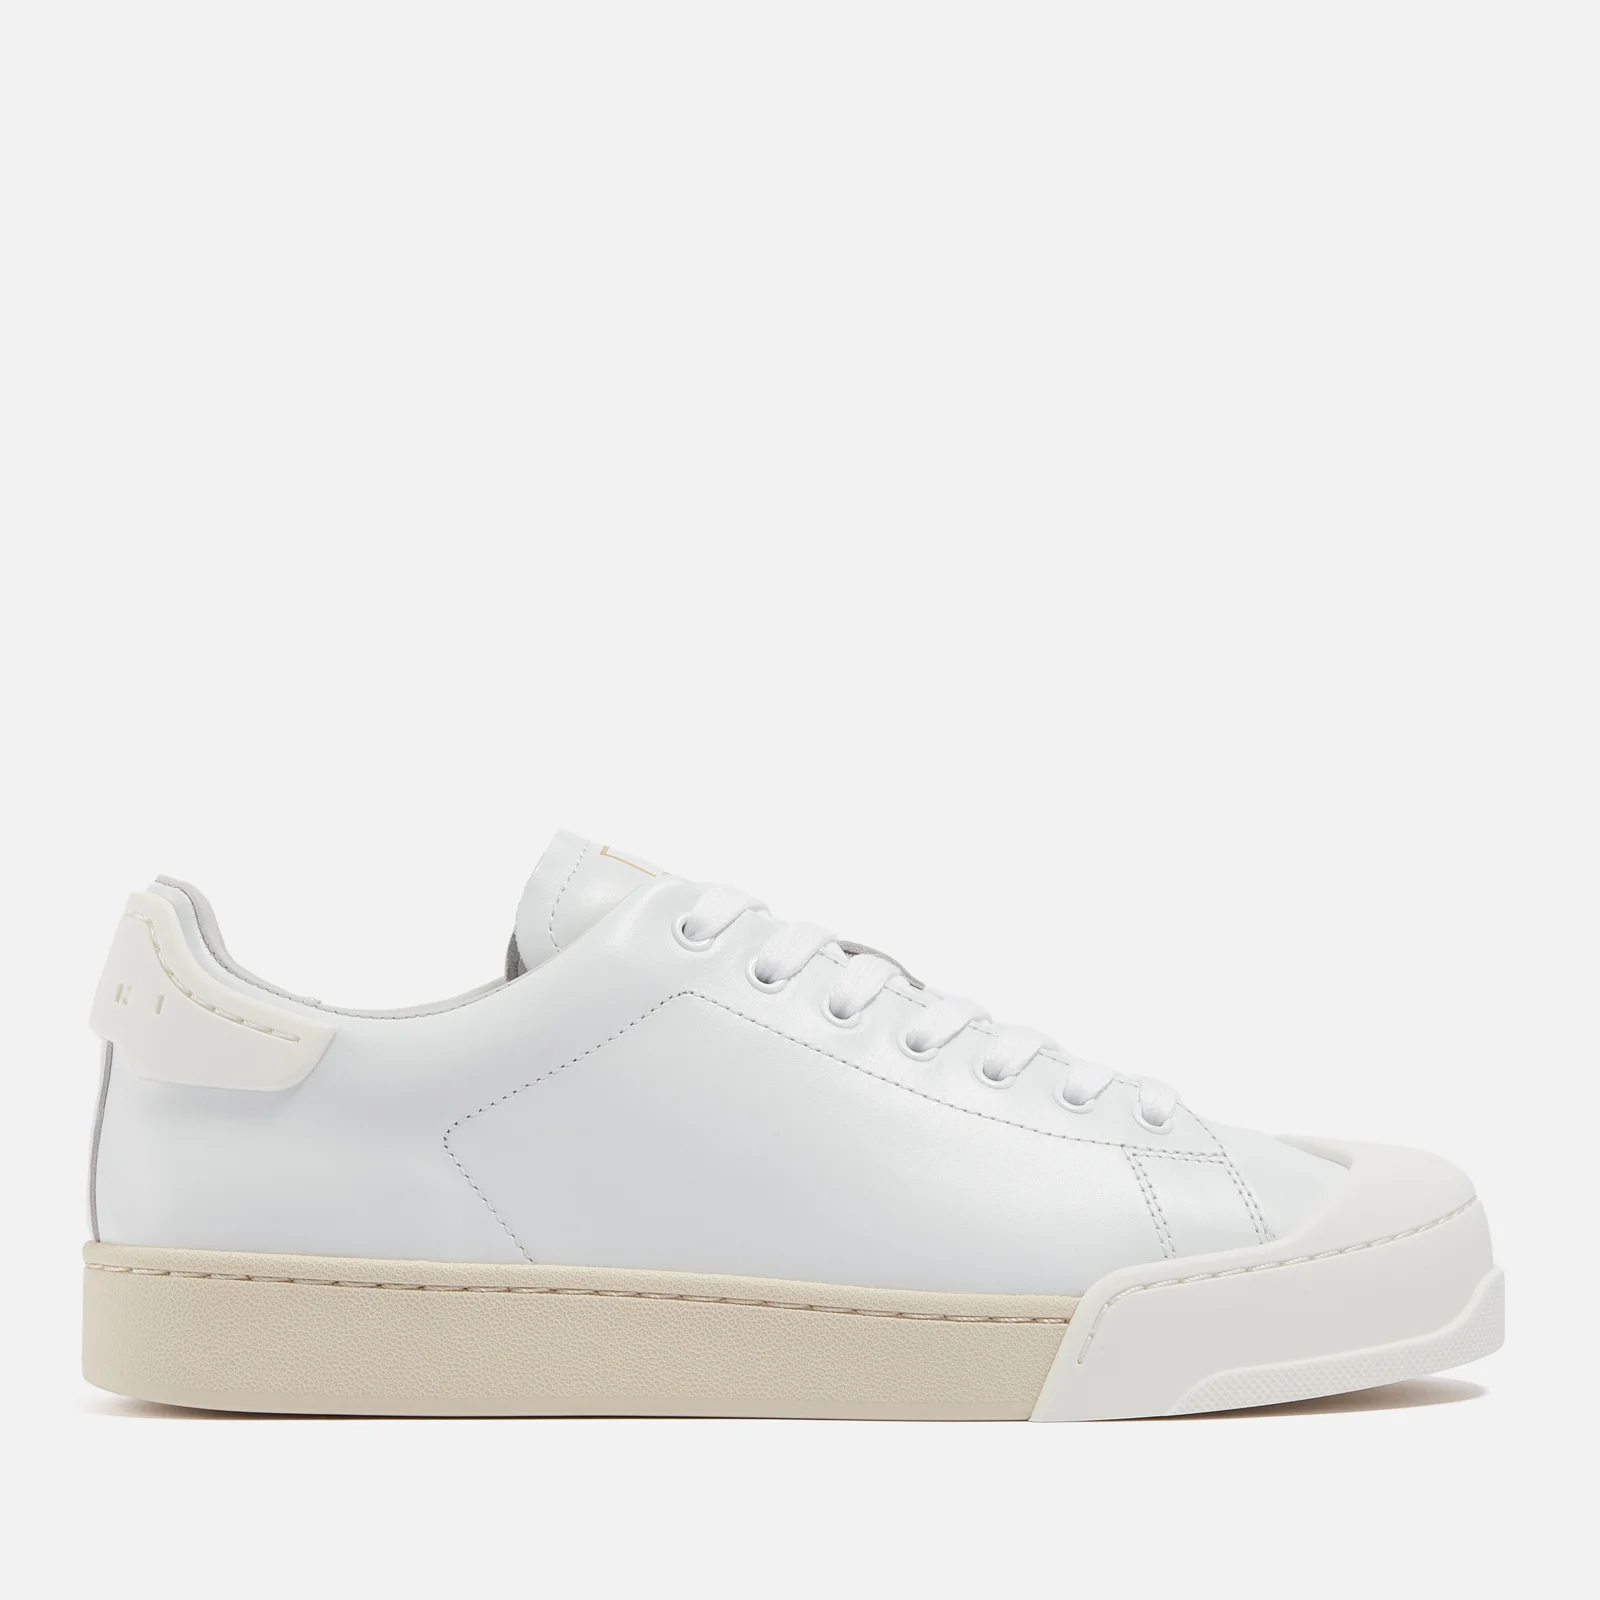 Marni Men's Leather Trainers Image 1